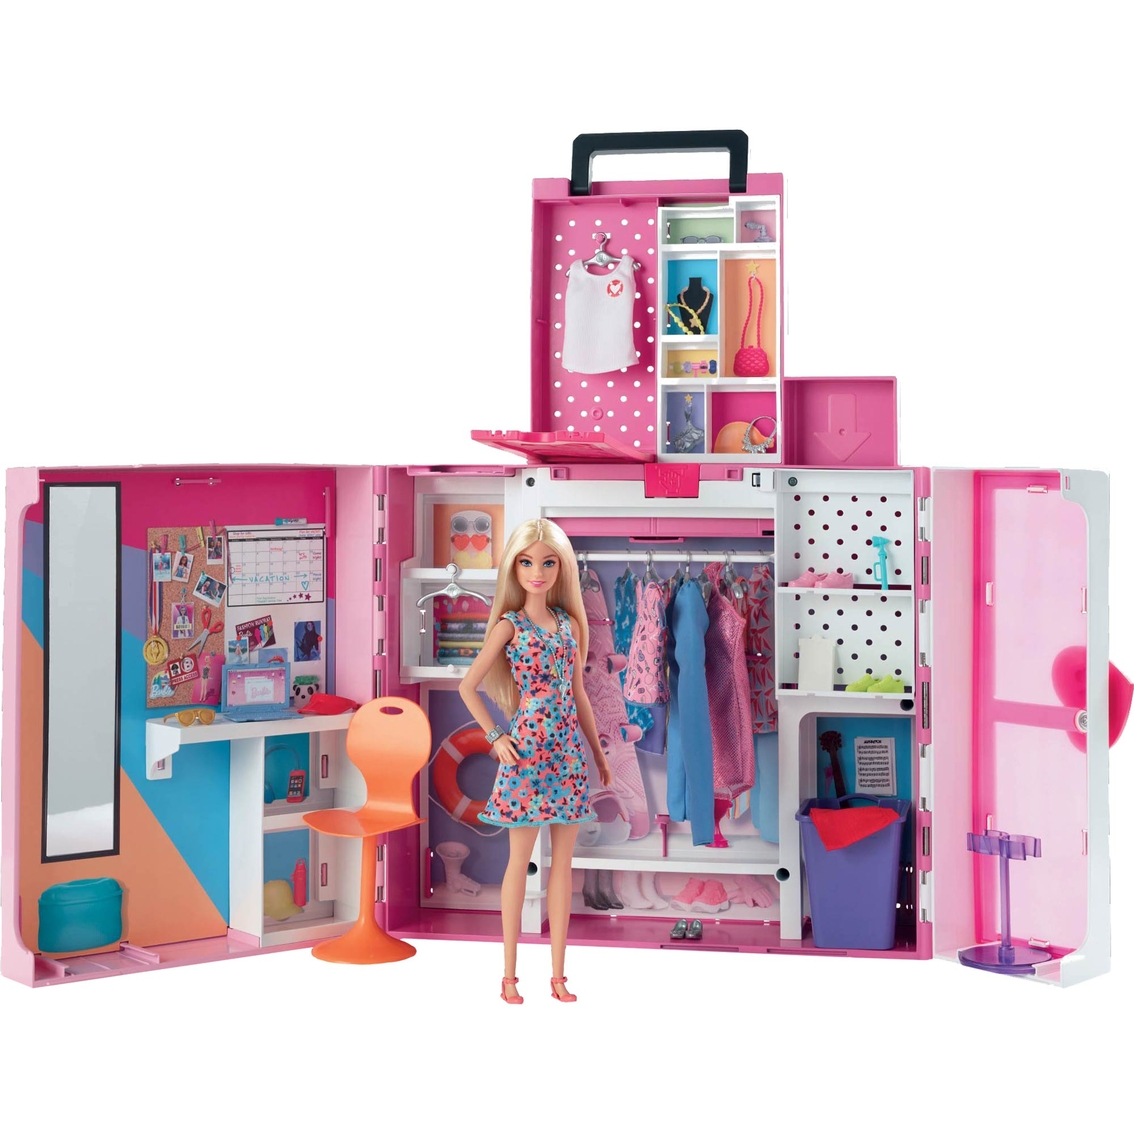 Barbie Dream Closet 2.0 with Doll - Image 2 of 5